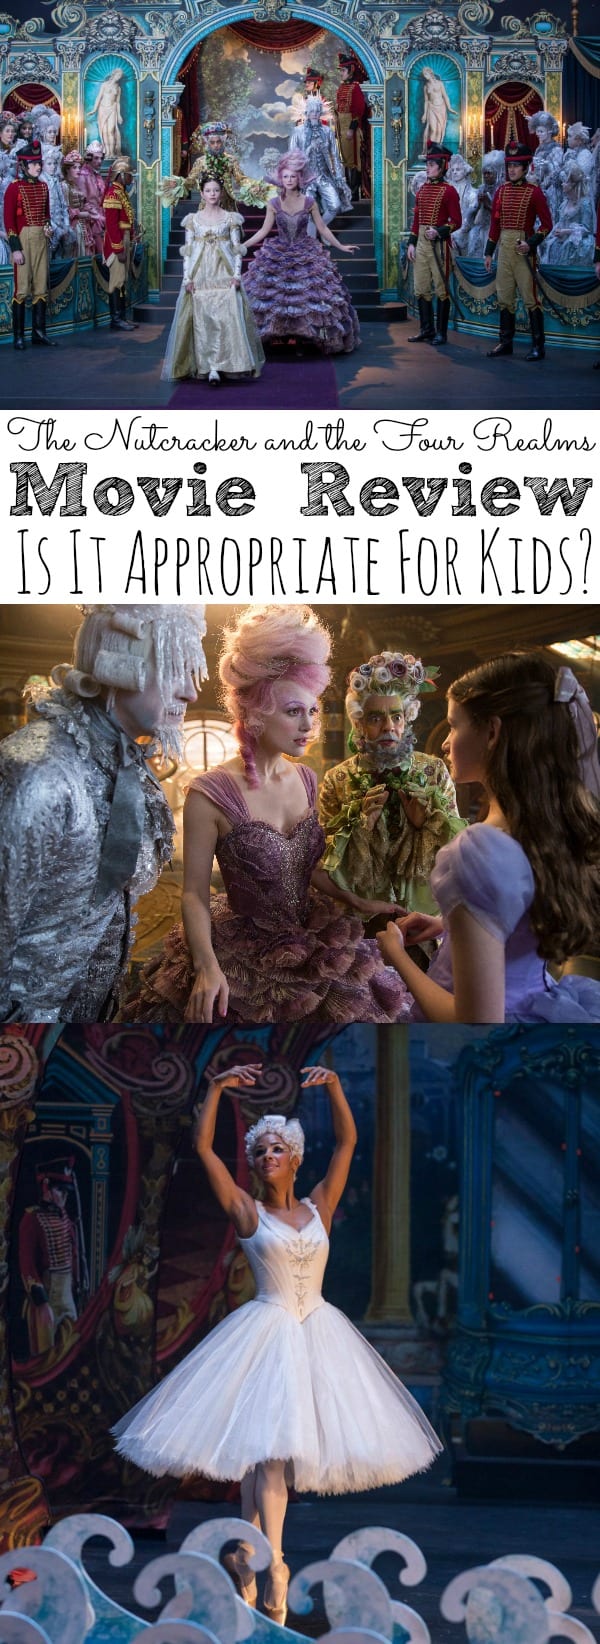 The Nutcracker and the Four Realms Movie Review | Is It Appropriate For Kids?